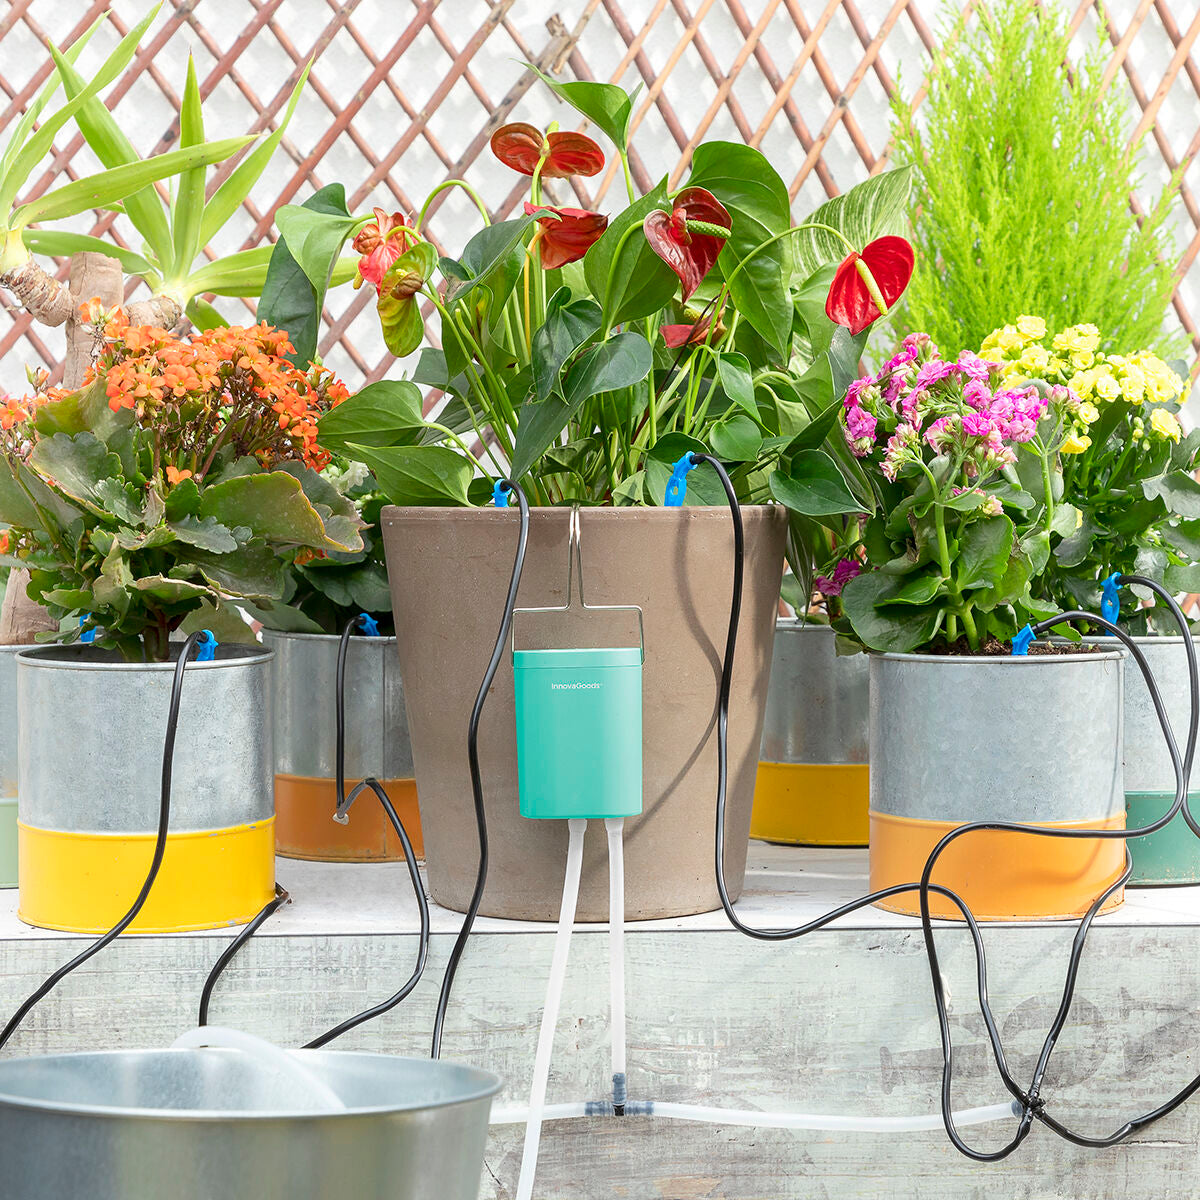 Automatic Drip Watering System for Plant Pots Regott InnovaGoods